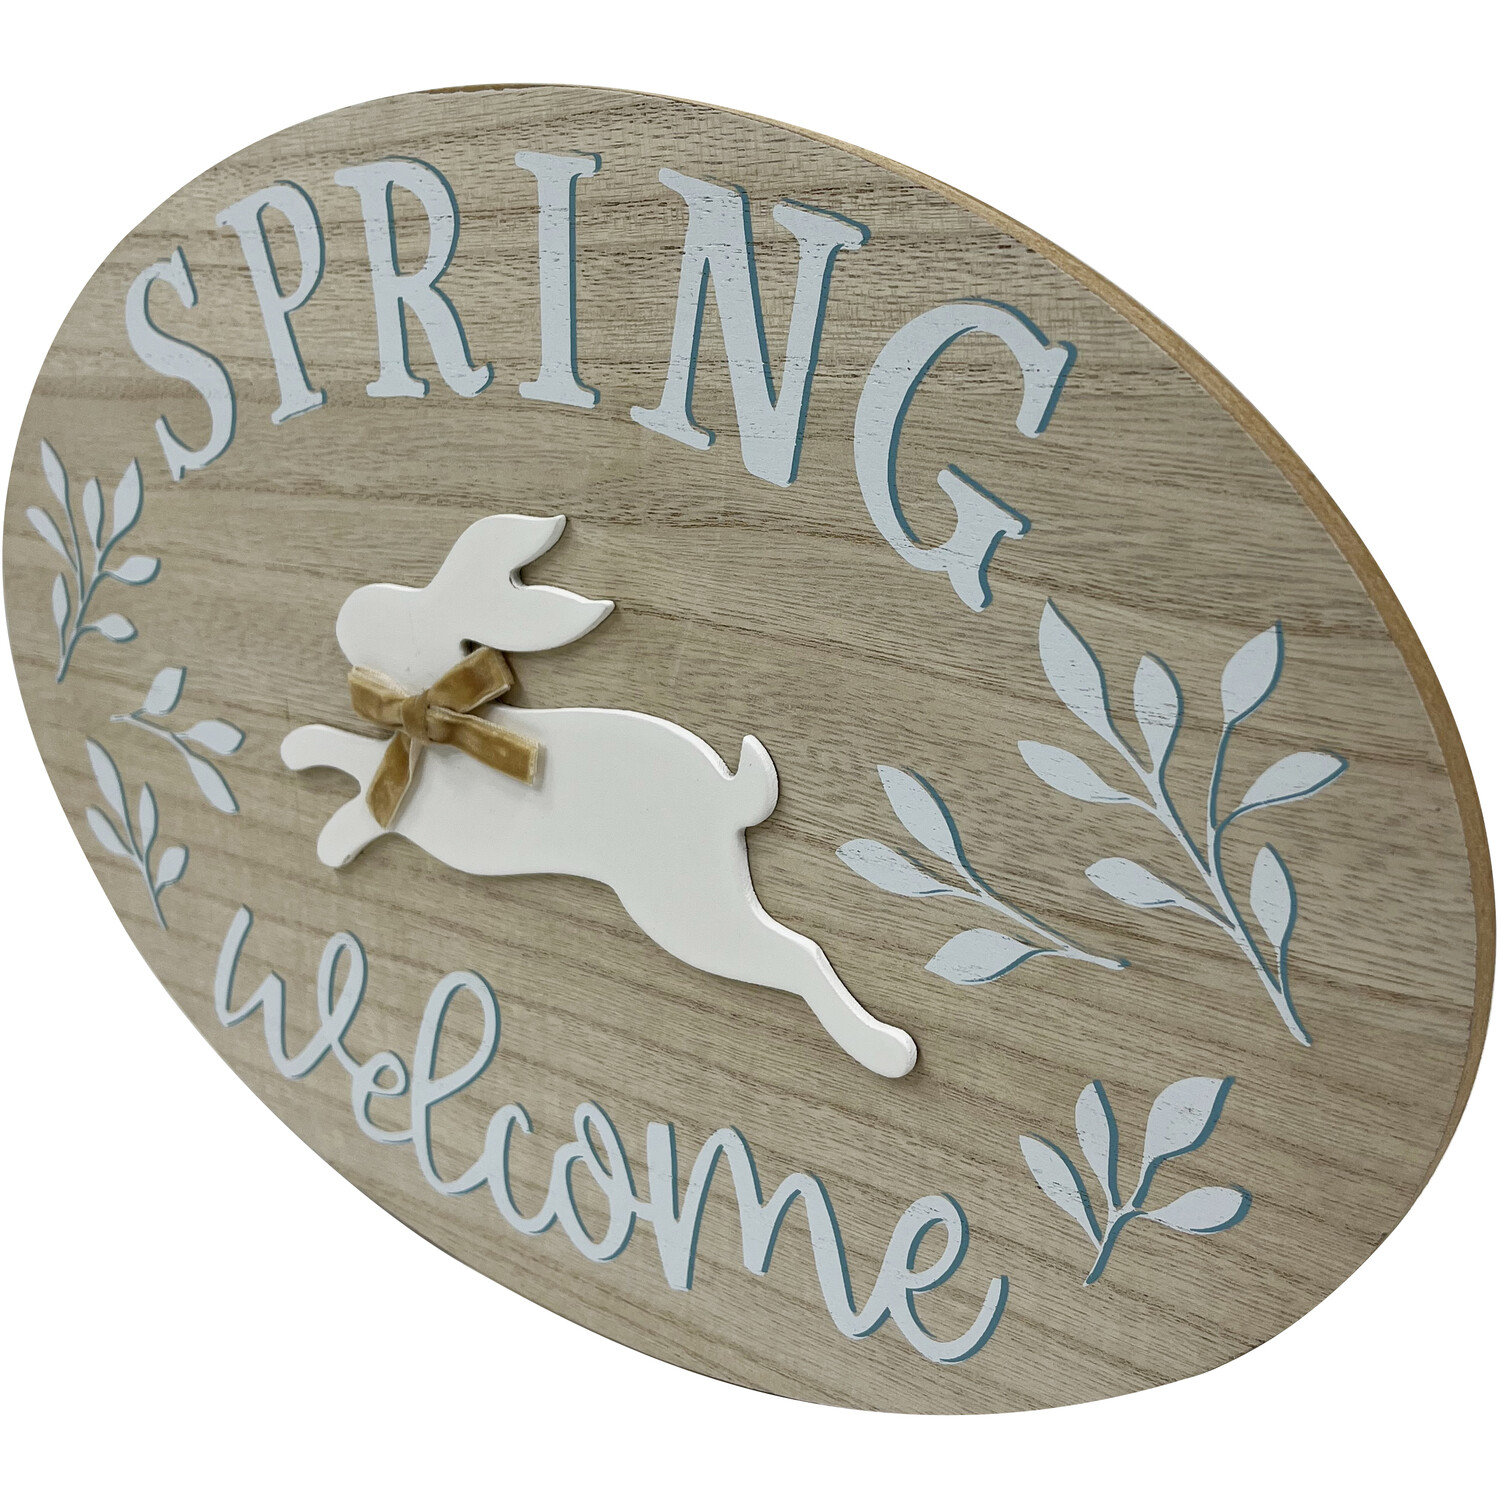 Welcome Spring Bunny Plaque - Brown Image 3